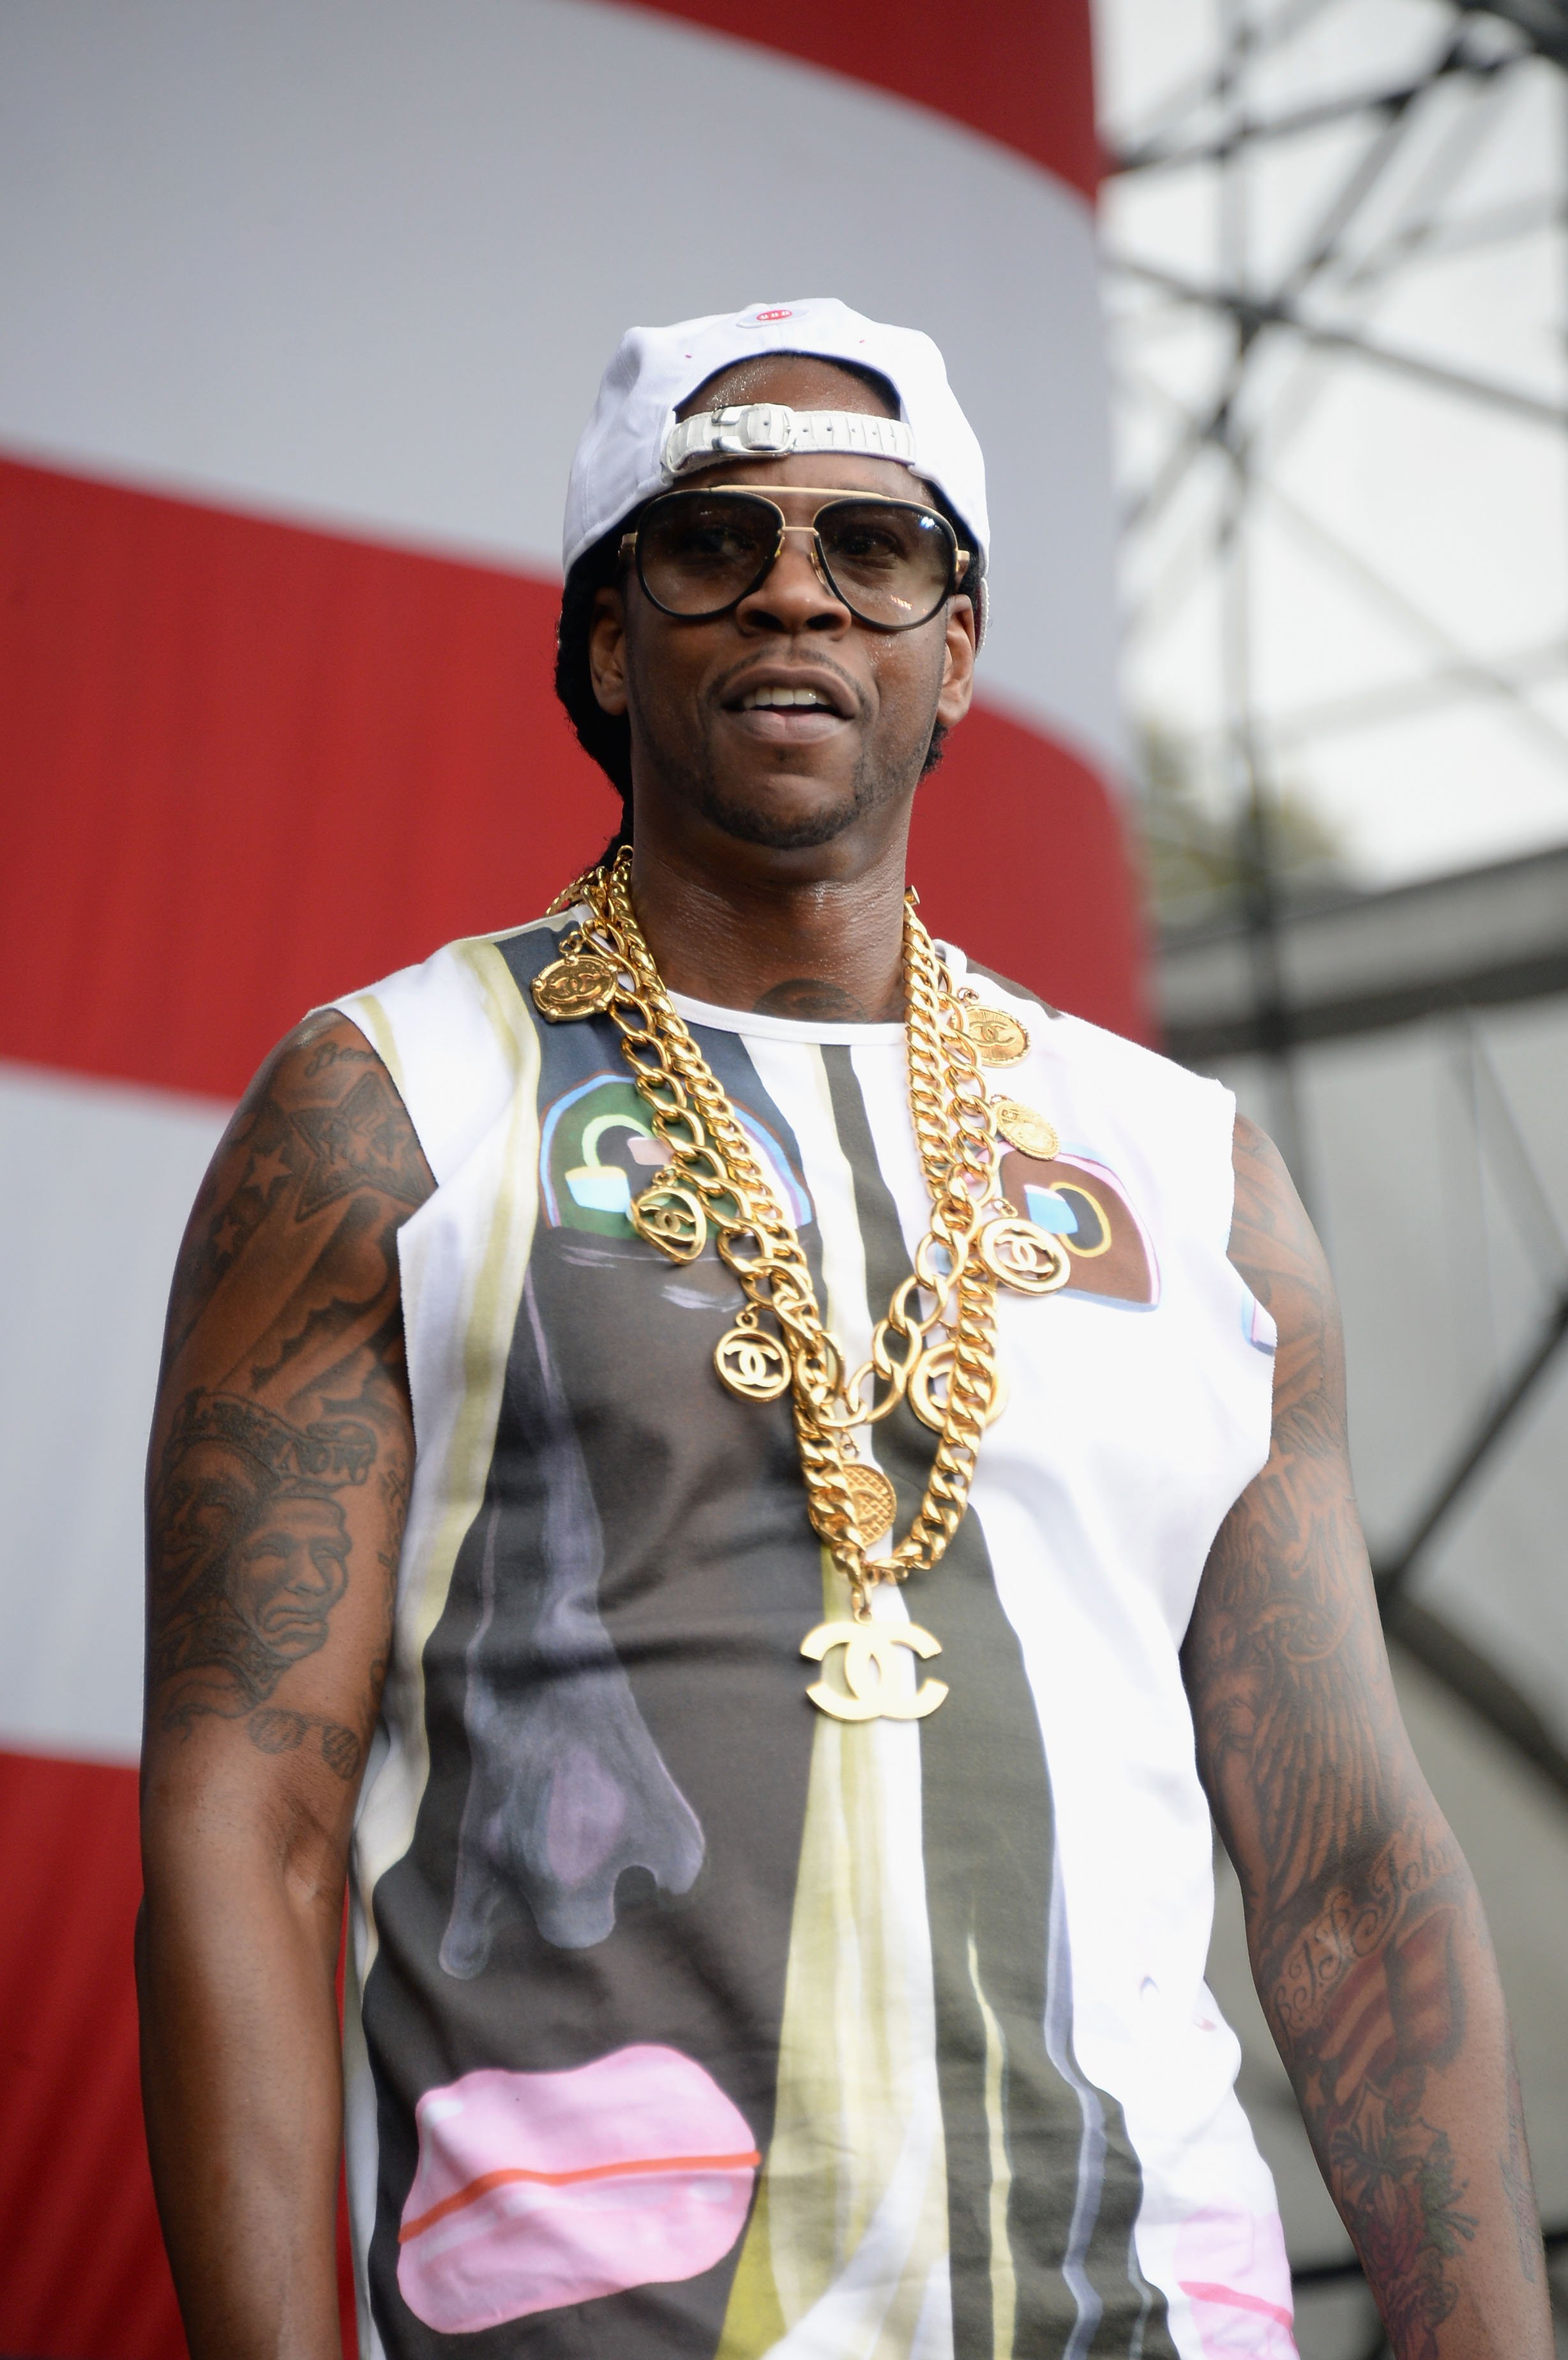 Rapper 2 Chainz during a 2013 performance. | Photo: Getty Images